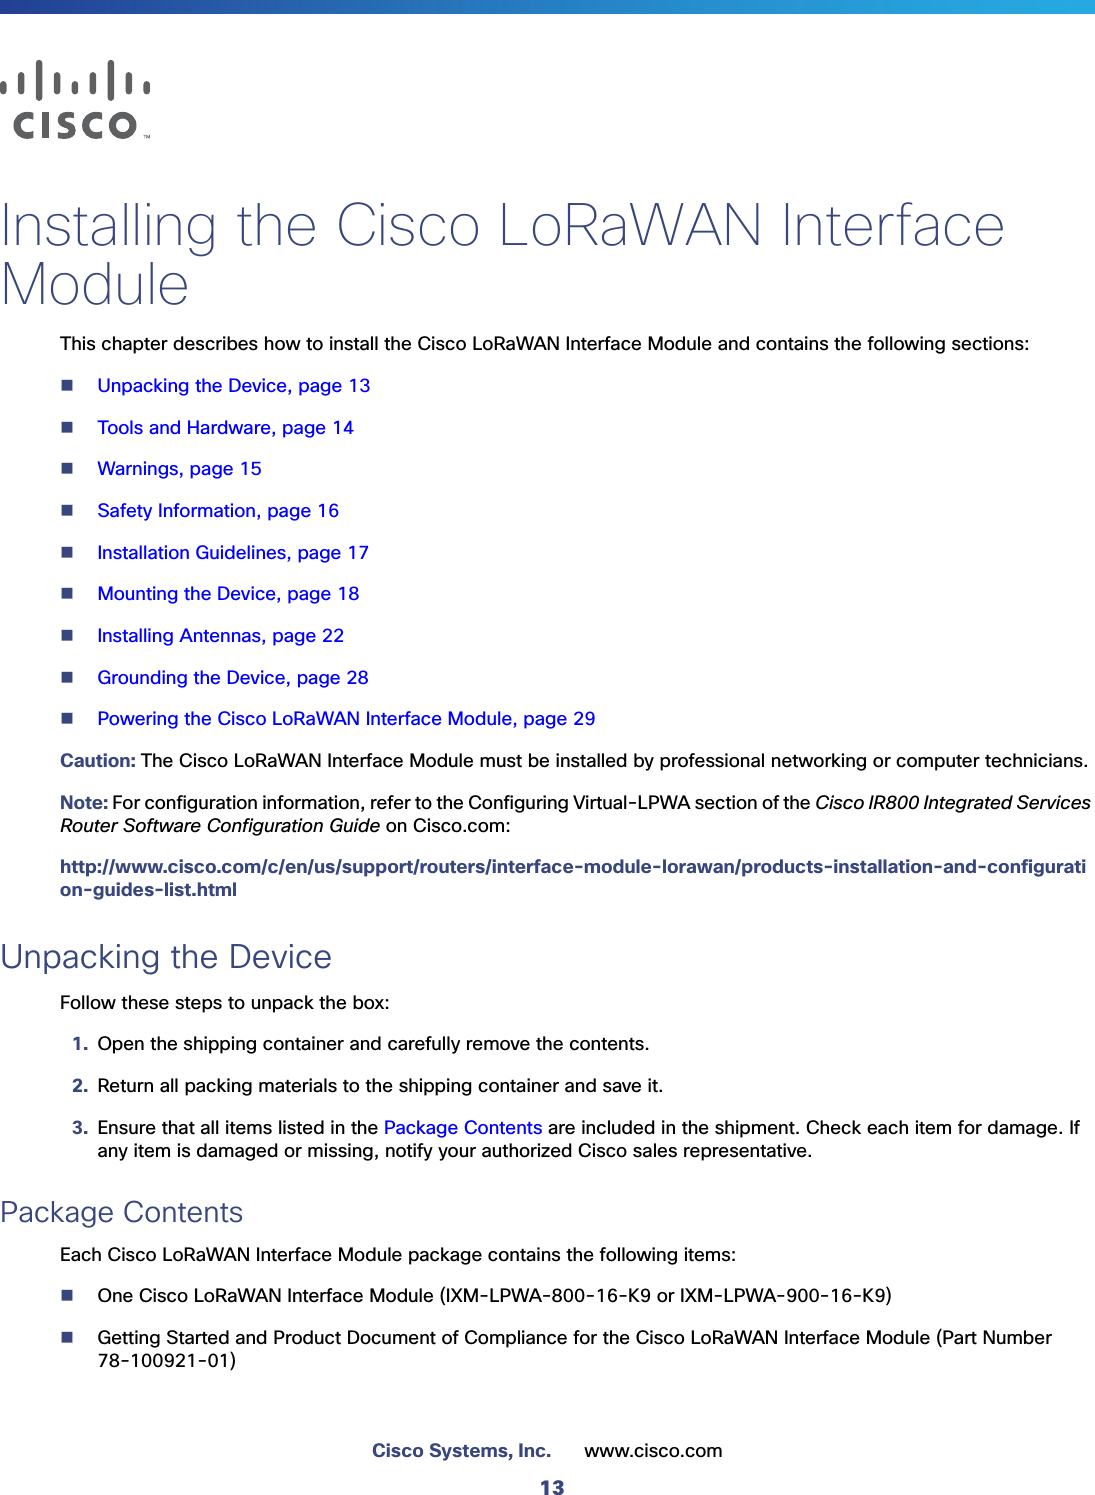 13Cisco Systems, Inc. www.cisco.com Installing the Cisco LoRaWAN Interface ModuleThis chapter describes how to install the Cisco LoRaWAN Interface Module and contains the following sections:Unpacking the Device, page 13Tools and Hardware, page 14Warnings, page 15Safety Information, page 16Installation Guidelines, page 17Mounting the Device, page 18Installing Antennas, page 22Grounding the Device, page 28Powering the Cisco LoRaWAN Interface Module, page 29Caution: The Cisco LoRaWAN Interface Module must be installed by professional networking or computer technicians.Note: For configuration information, refer to the Configuring Virtual-LPWA section of the Cisco IR800 Integrated Services Router Software Configuration Guide on Cisco.com:http://www.cisco.com/c/en/us/support/routers/interface-module-lorawan/products-installation-and-configuration-guides-list.htmlUnpacking the DeviceFollow these steps to unpack the box:1. Open the shipping container and carefully remove the contents. 2. Return all packing materials to the shipping container and save it.3. Ensure that all items listed in the Package Contents are included in the shipment. Check each item for damage. If any item is damaged or missing, notify your authorized Cisco sales representative. Package ContentsEach Cisco LoRaWAN Interface Module package contains the following items:One Cisco LoRaWAN Interface Module (IXM-LPWA-800-16-K9 or IXM-LPWA-900-16-K9)Getting Started and Product Document of Compliance for the Cisco LoRaWAN Interface Module (Part Number 78-100921-01) 